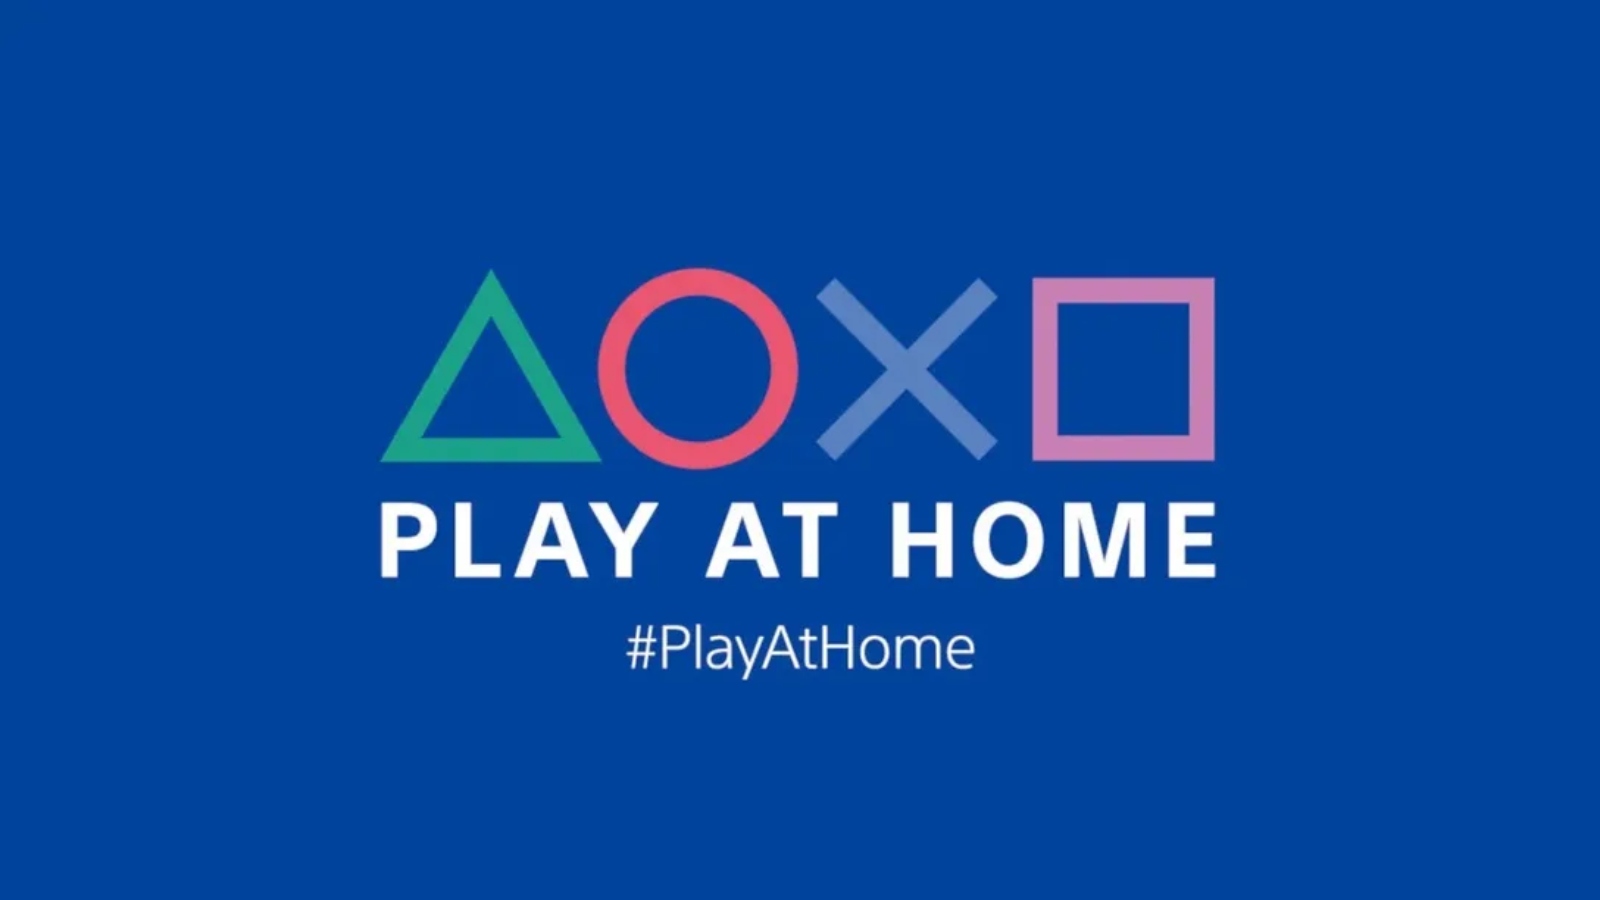 Sony To Give Away More Free Content Under Play At Home Initiative